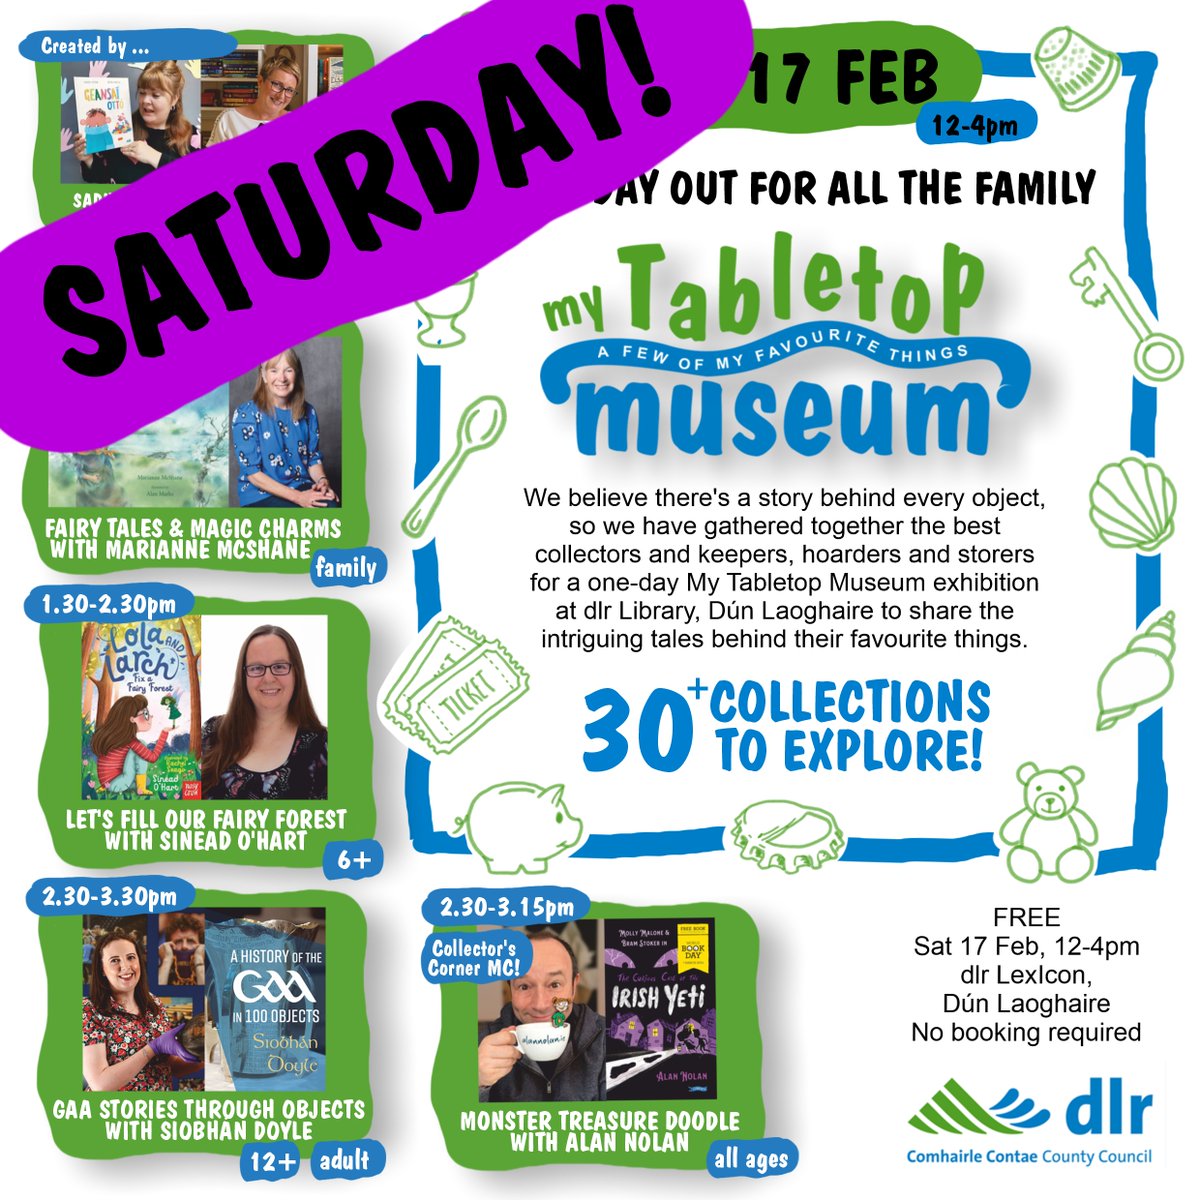 🎉It's nearly here! #MyTabletopMuseum will kick off at 12 this Saturday in LexIcon @DLR_Libraries in Dún Laoghaire. We have 30+ AMAZING Tabletop Curators of all ages coming to share their special collections and some brilliant Irish author events too! FREE fun for all the family!